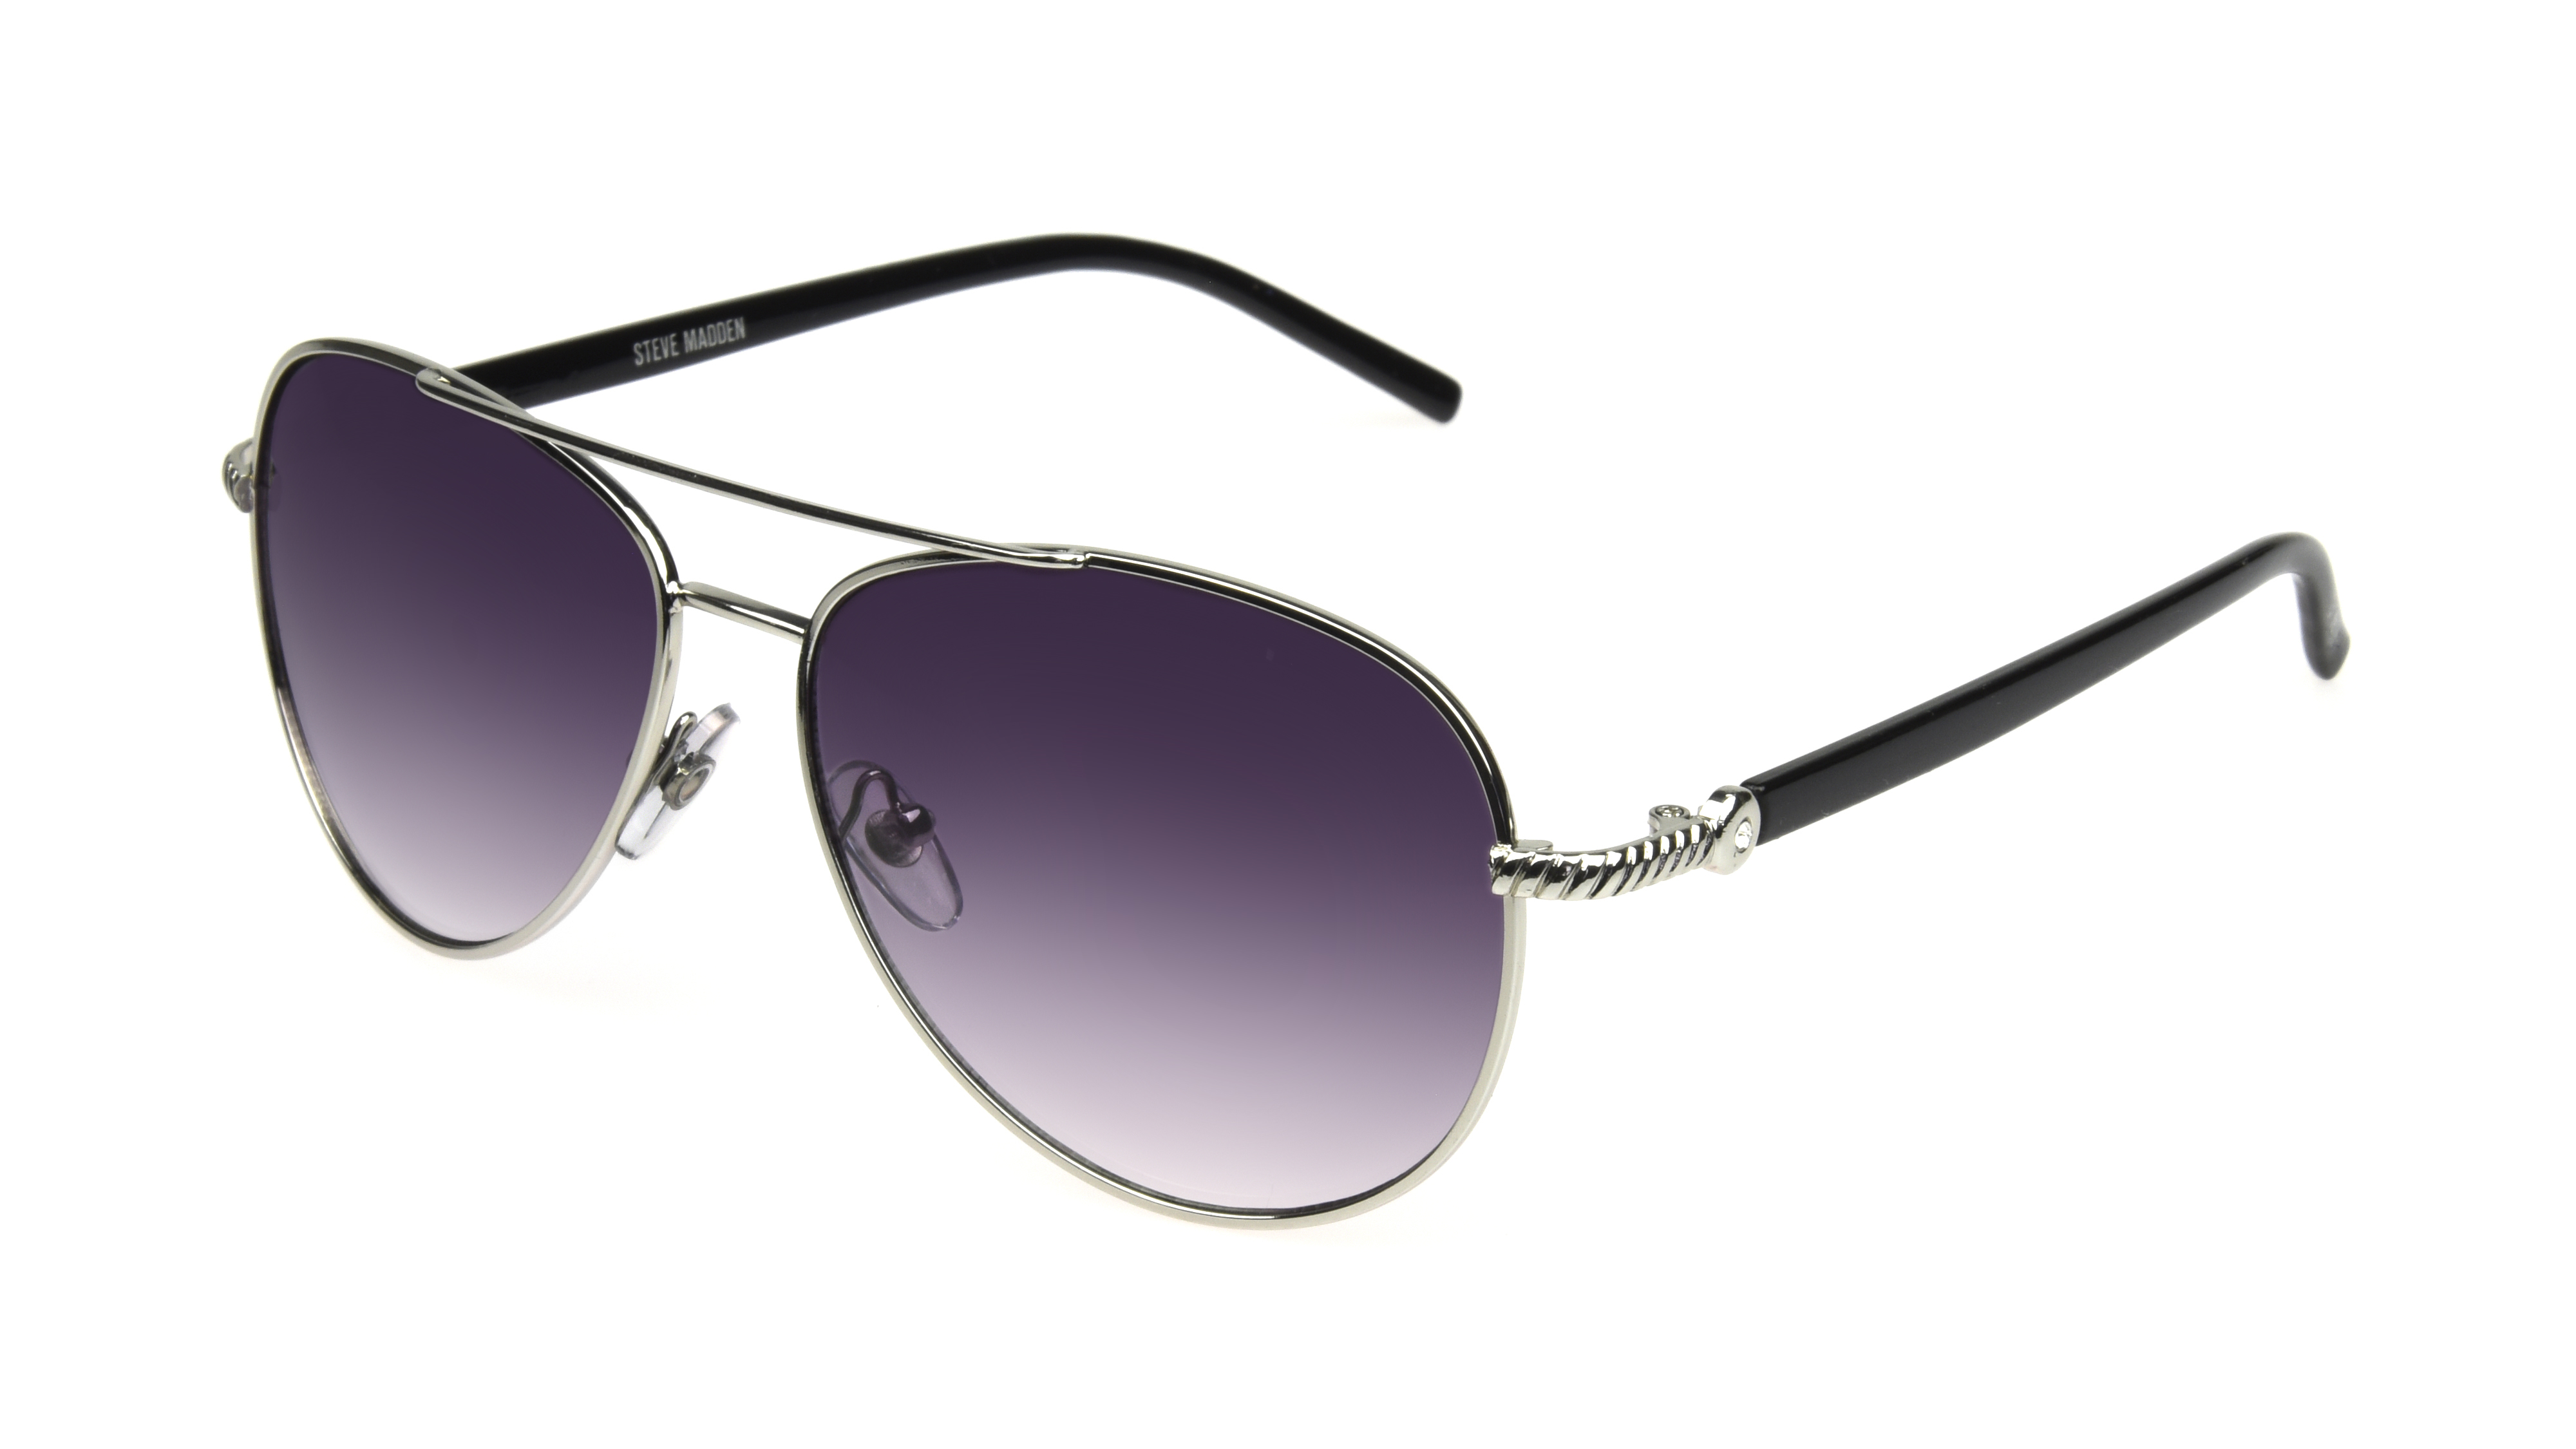 Steve Madden Women's Silver and Black Stone Accented Aviator Sunglasses - image 3 of 3